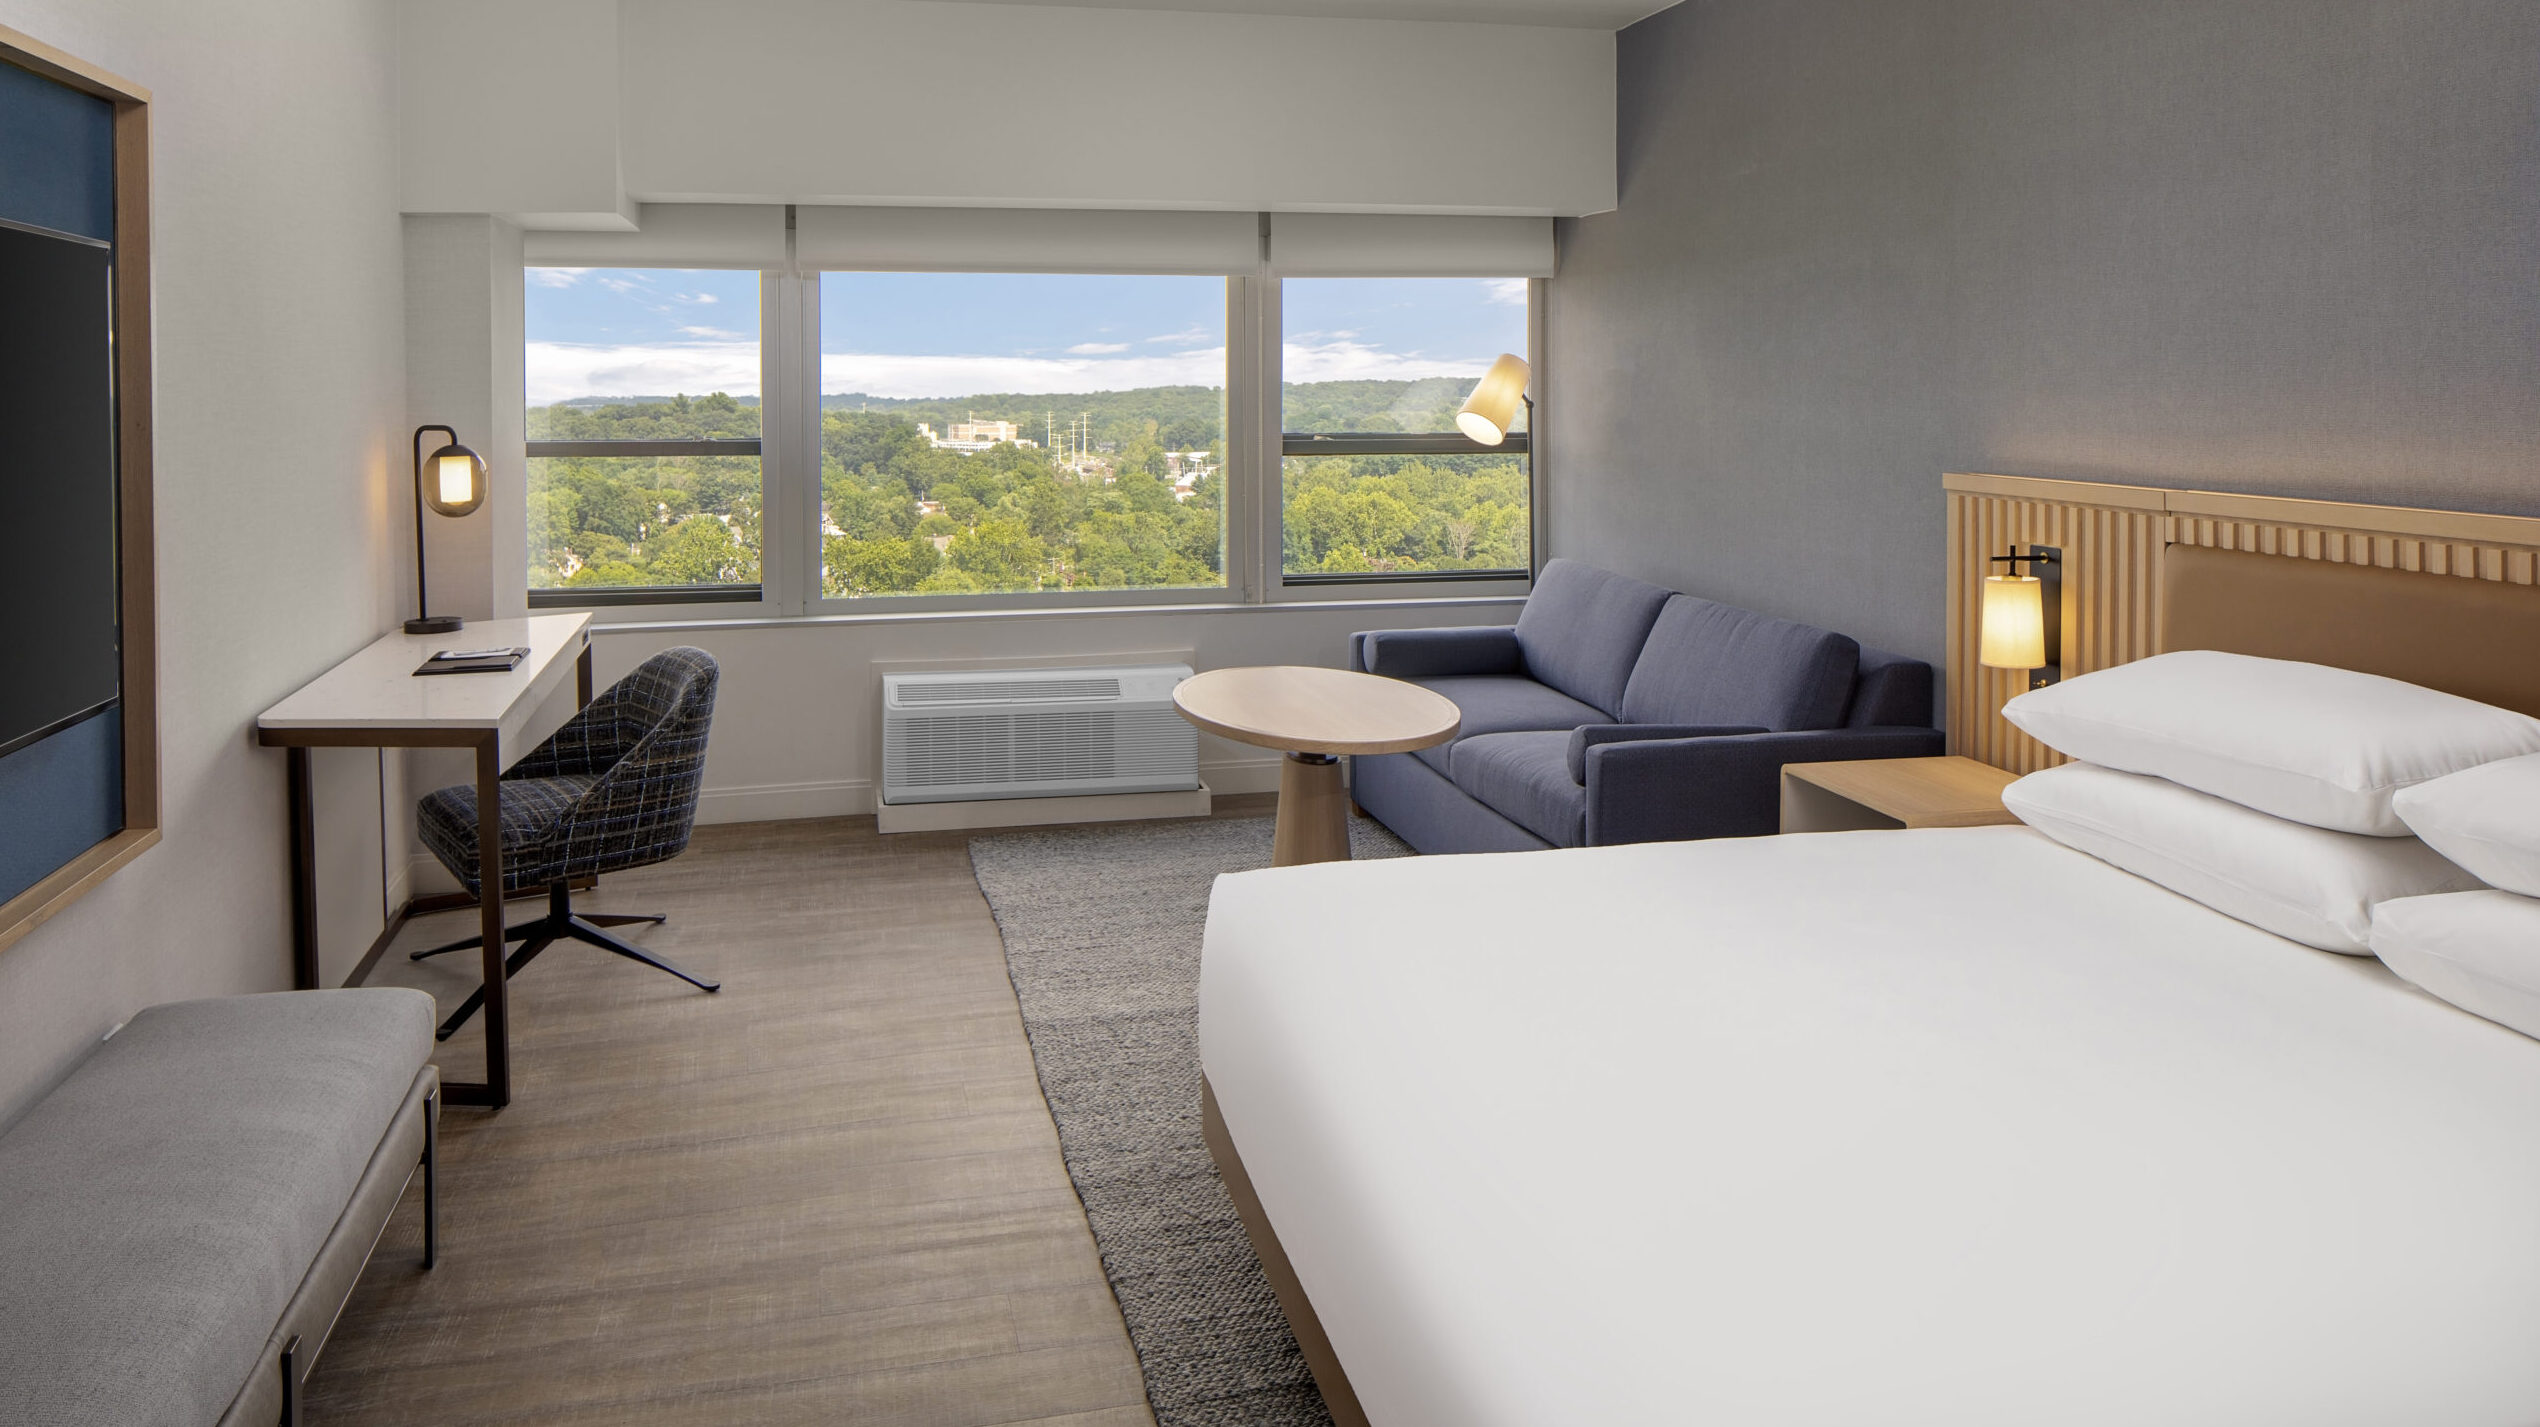 A guest room in Hyatt Regency Morristown with grey walls and furnishings, a desk and a view of a forest 